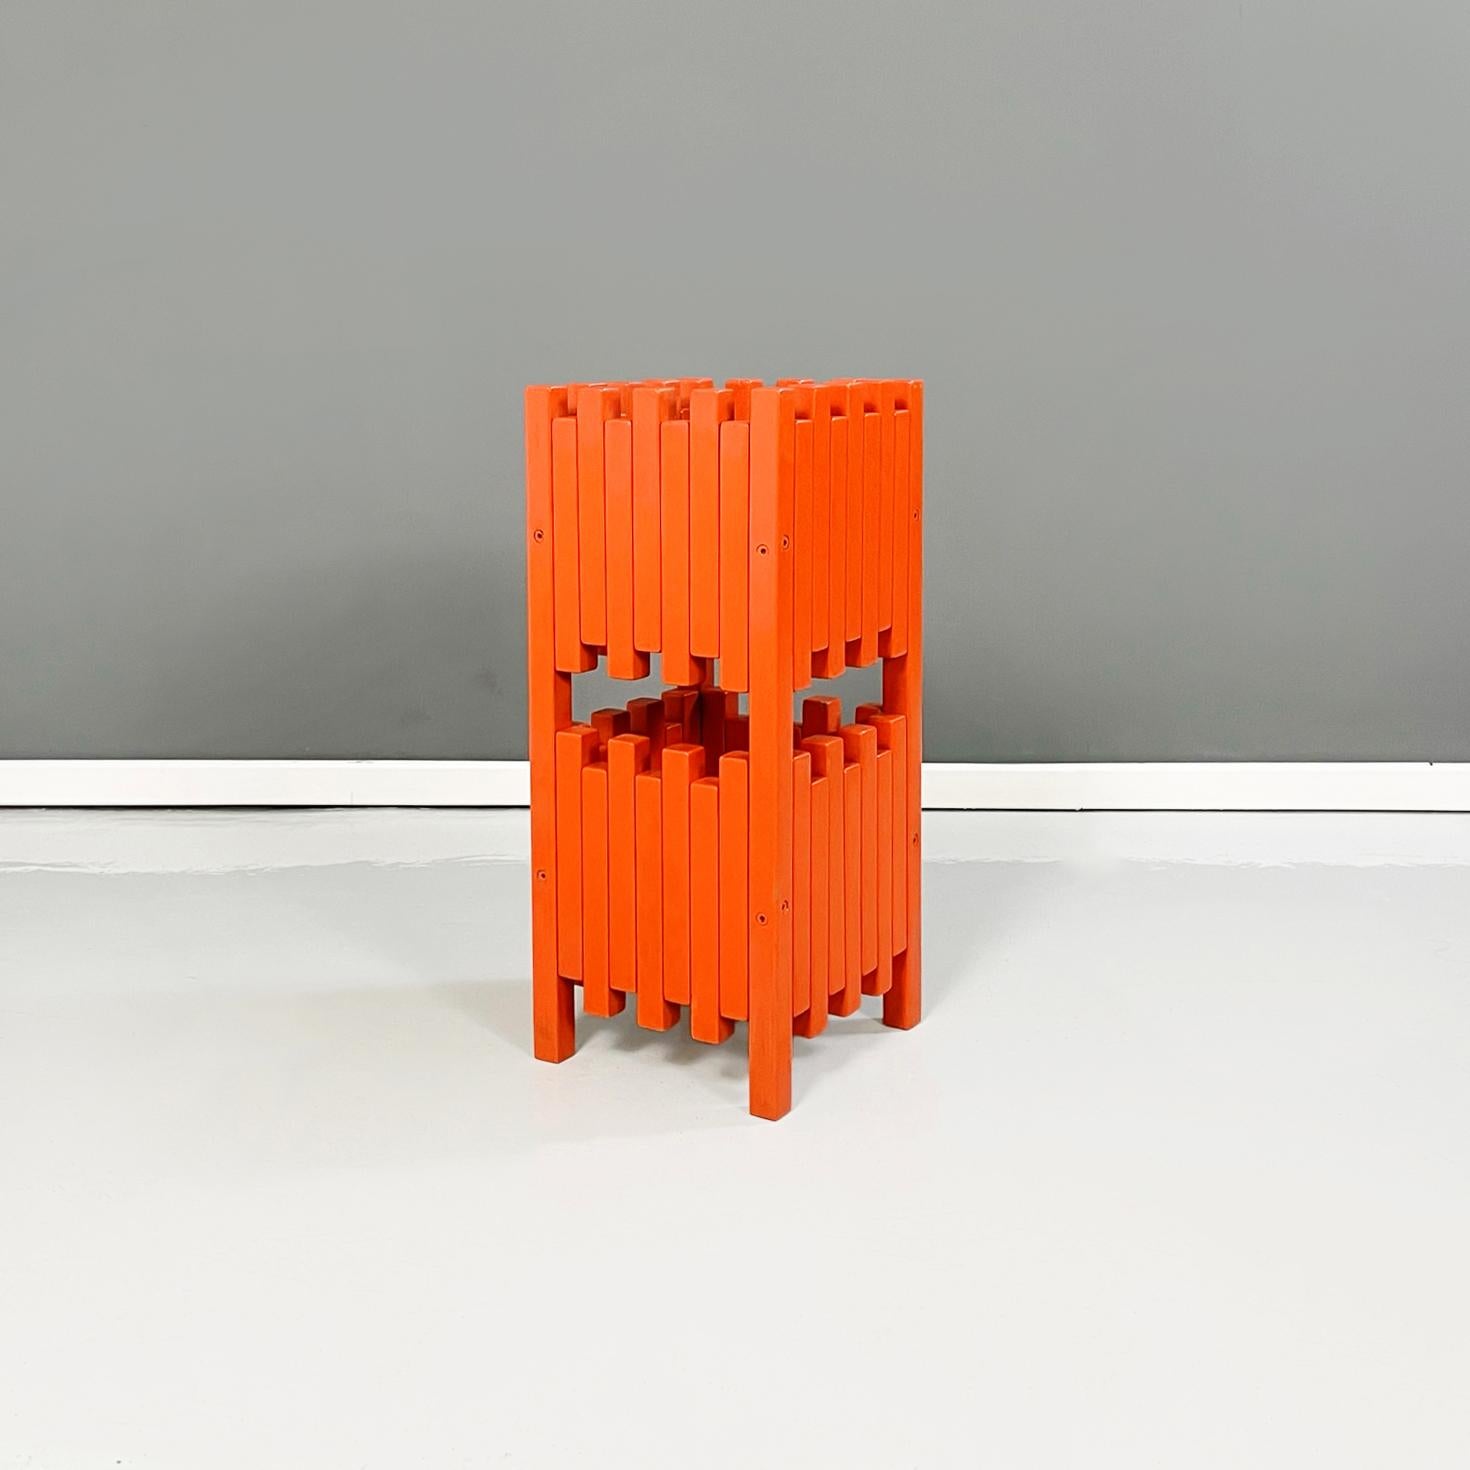 Italian mid-century red wooden umbrella stand by Sottsass for Poltronova, 1960s
Umbrella stand with a square base made up of several rectangular strips of wood painted in orange-red.
Produced by Poltronova in 1960s and designed by Ettore Sottsass